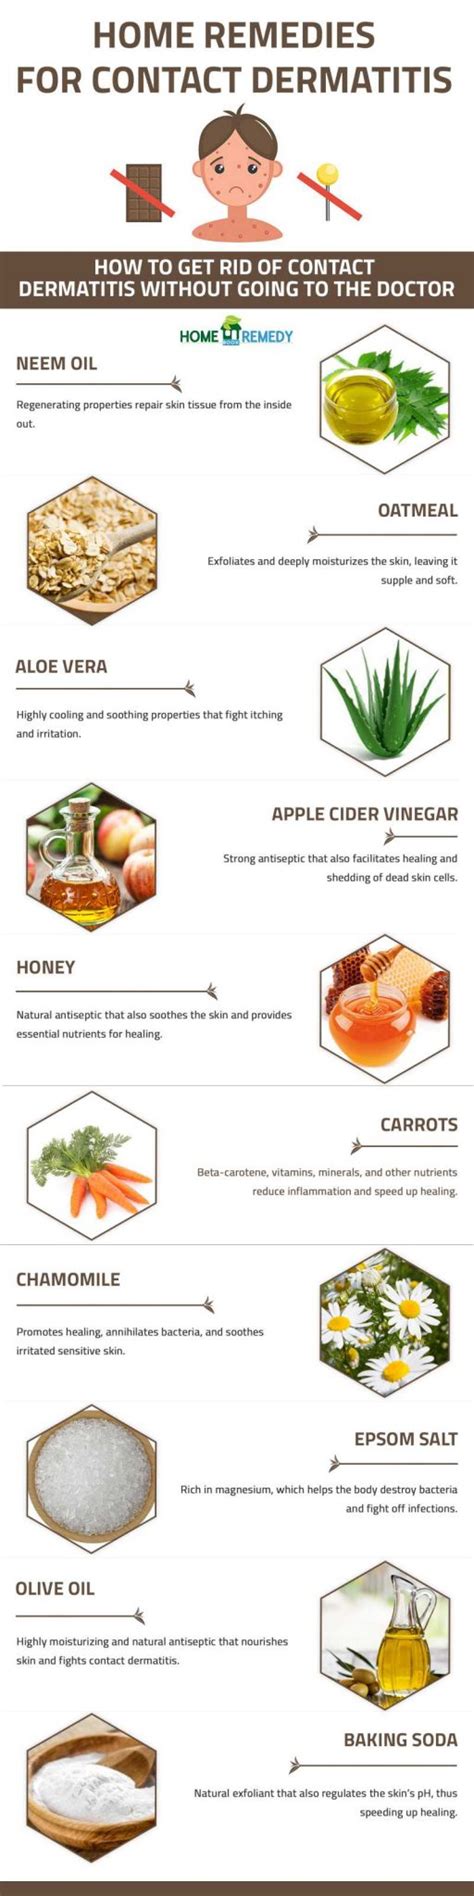 home remedies  contact dermatitis infographic